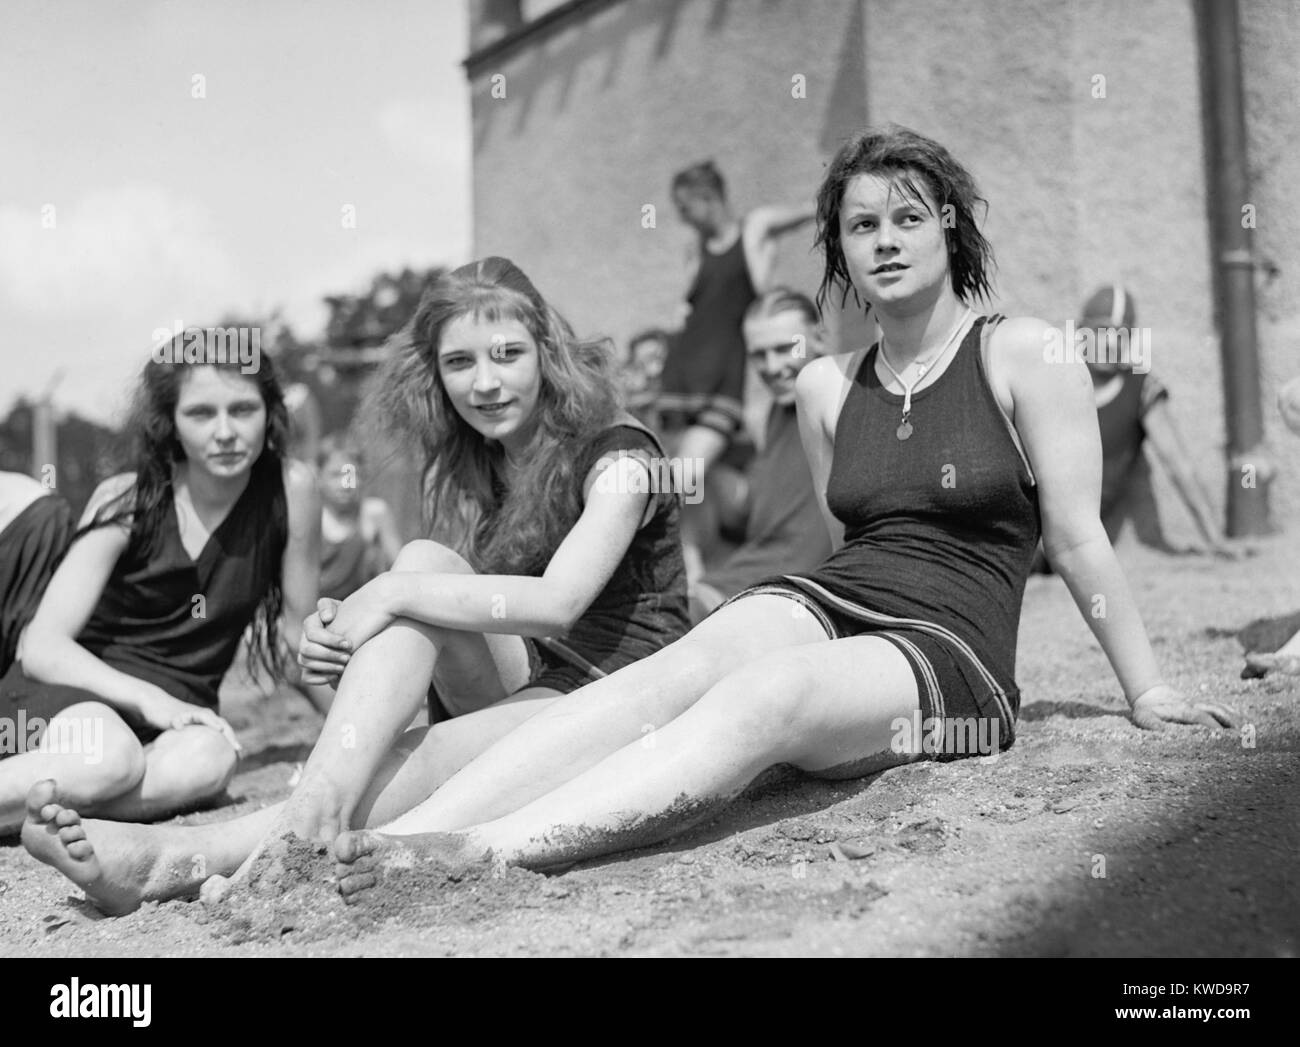 Three young women in bathing suits on sandy beach at the Tidal Basin, Washington, D.C. Ca. 1925. (BSLOC 2015 17 199) Stock Photo